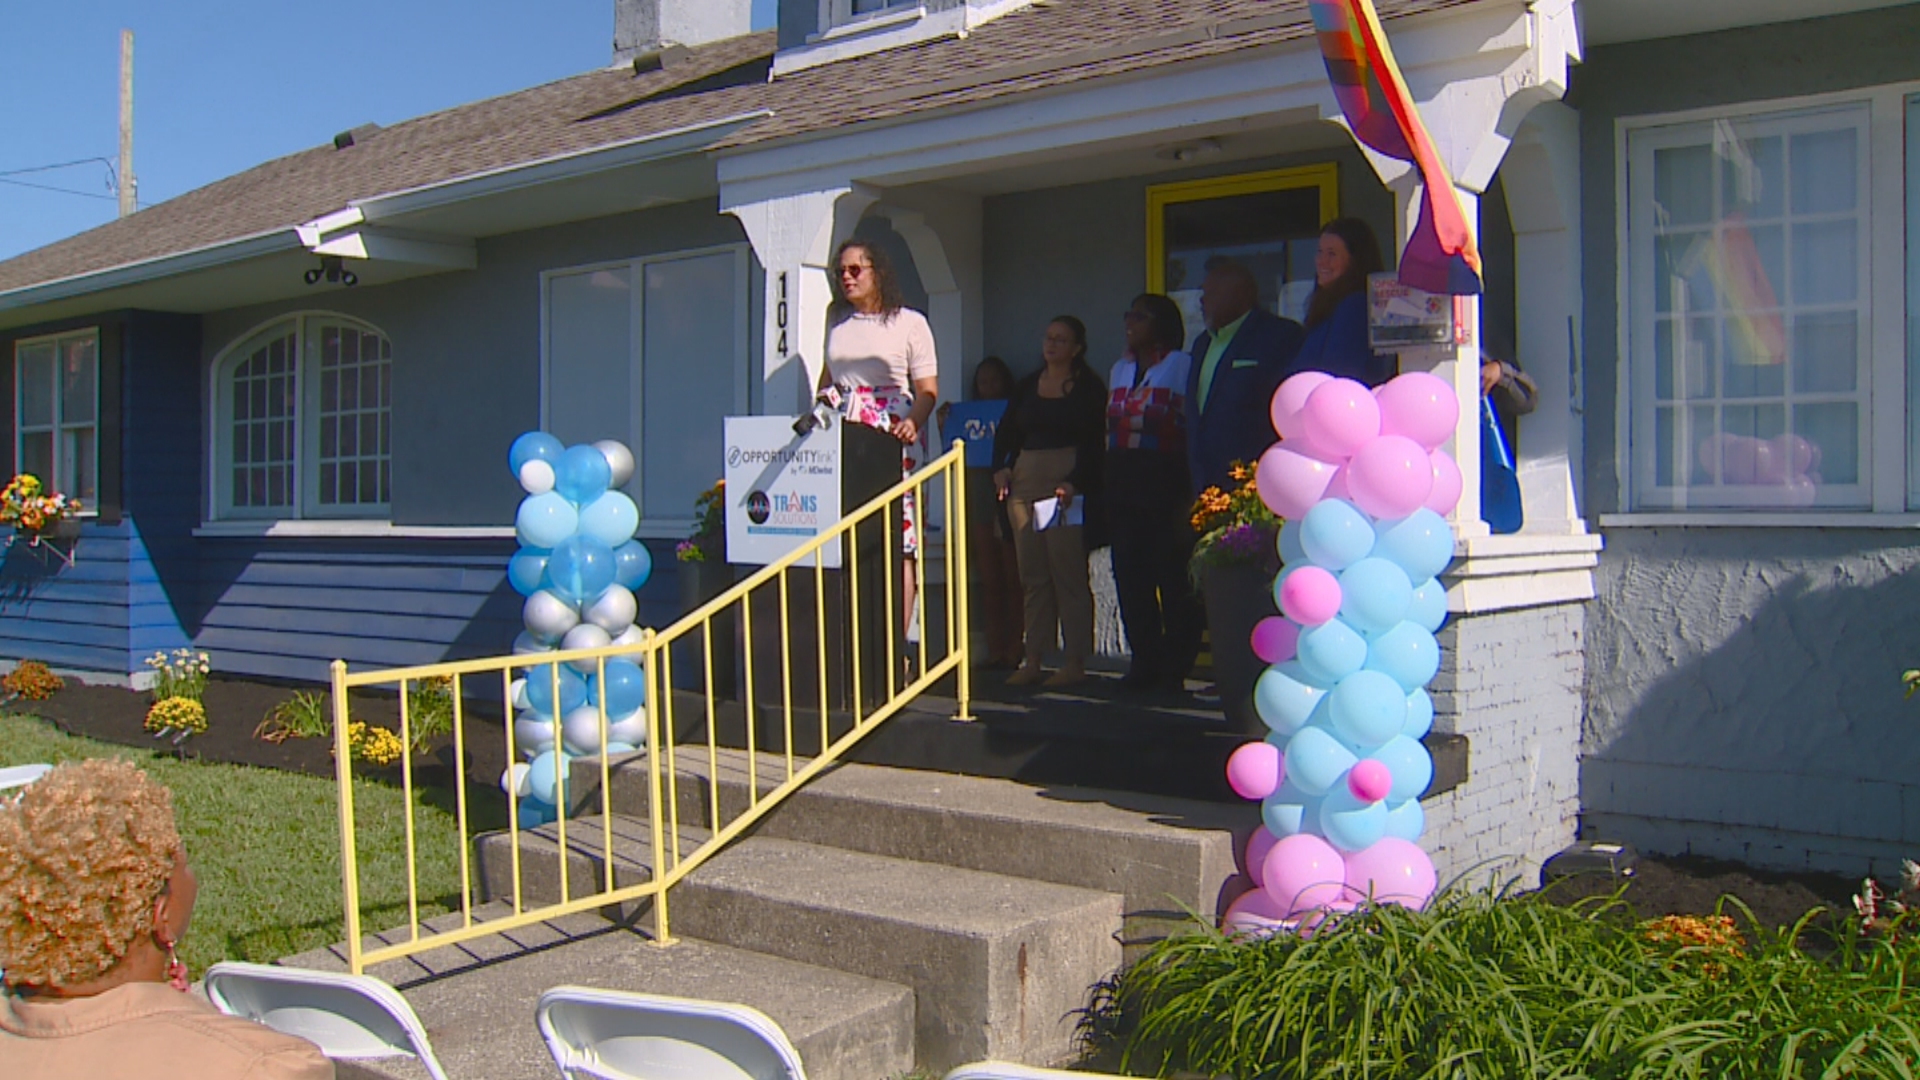 Transgender resource center opens in Indianapolis